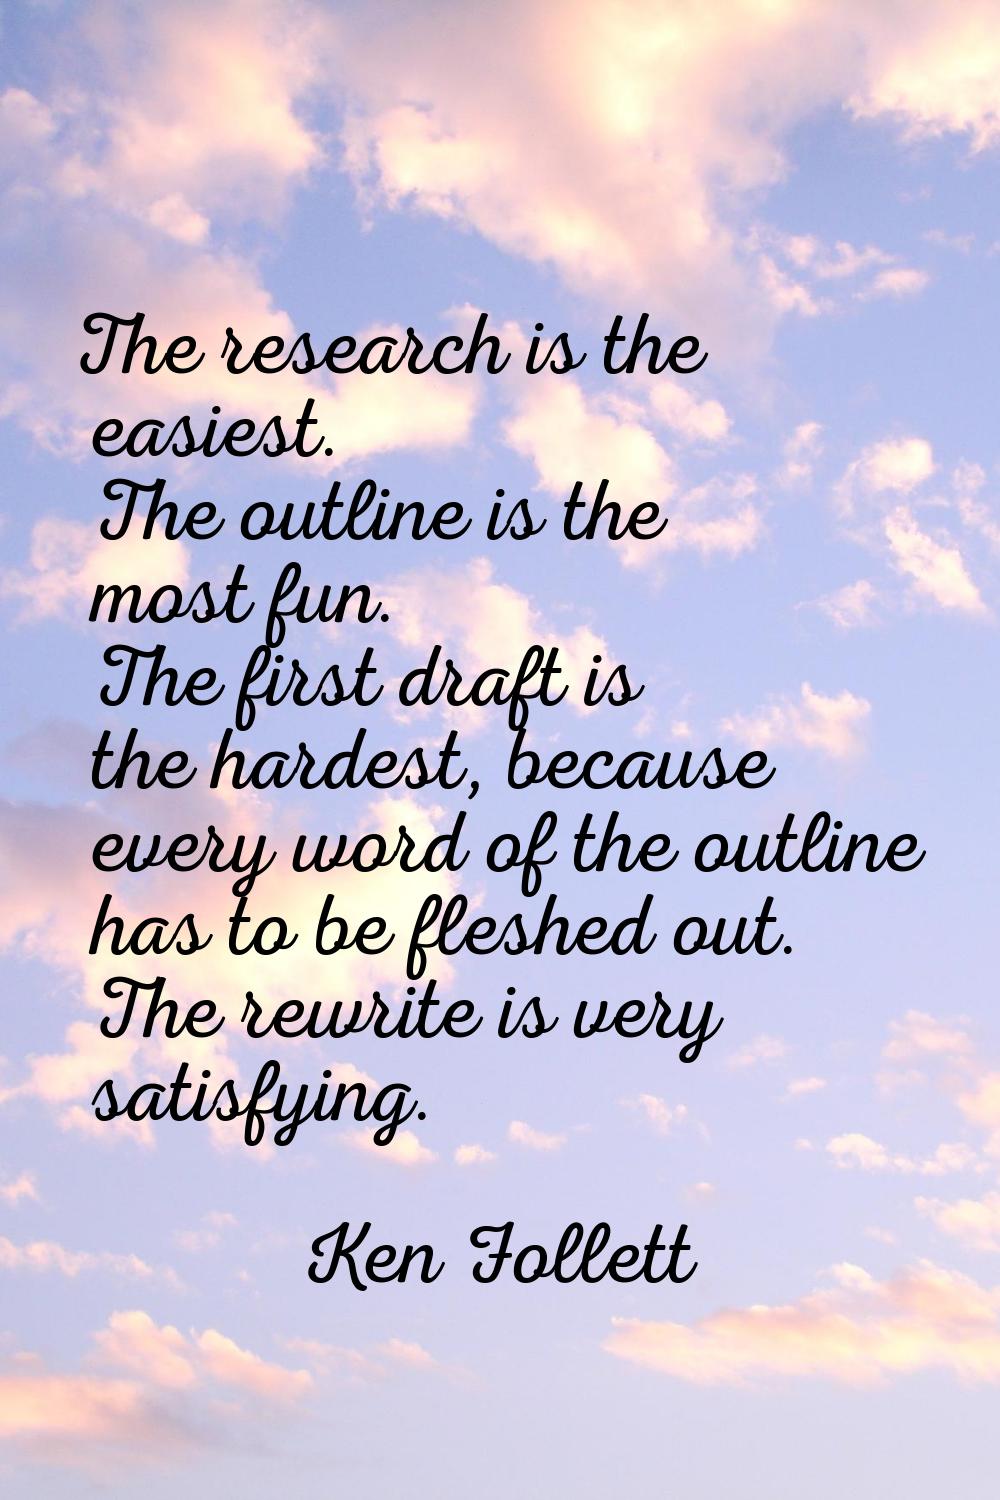 The research is the easiest. The outline is the most fun. The first draft is the hardest, because e